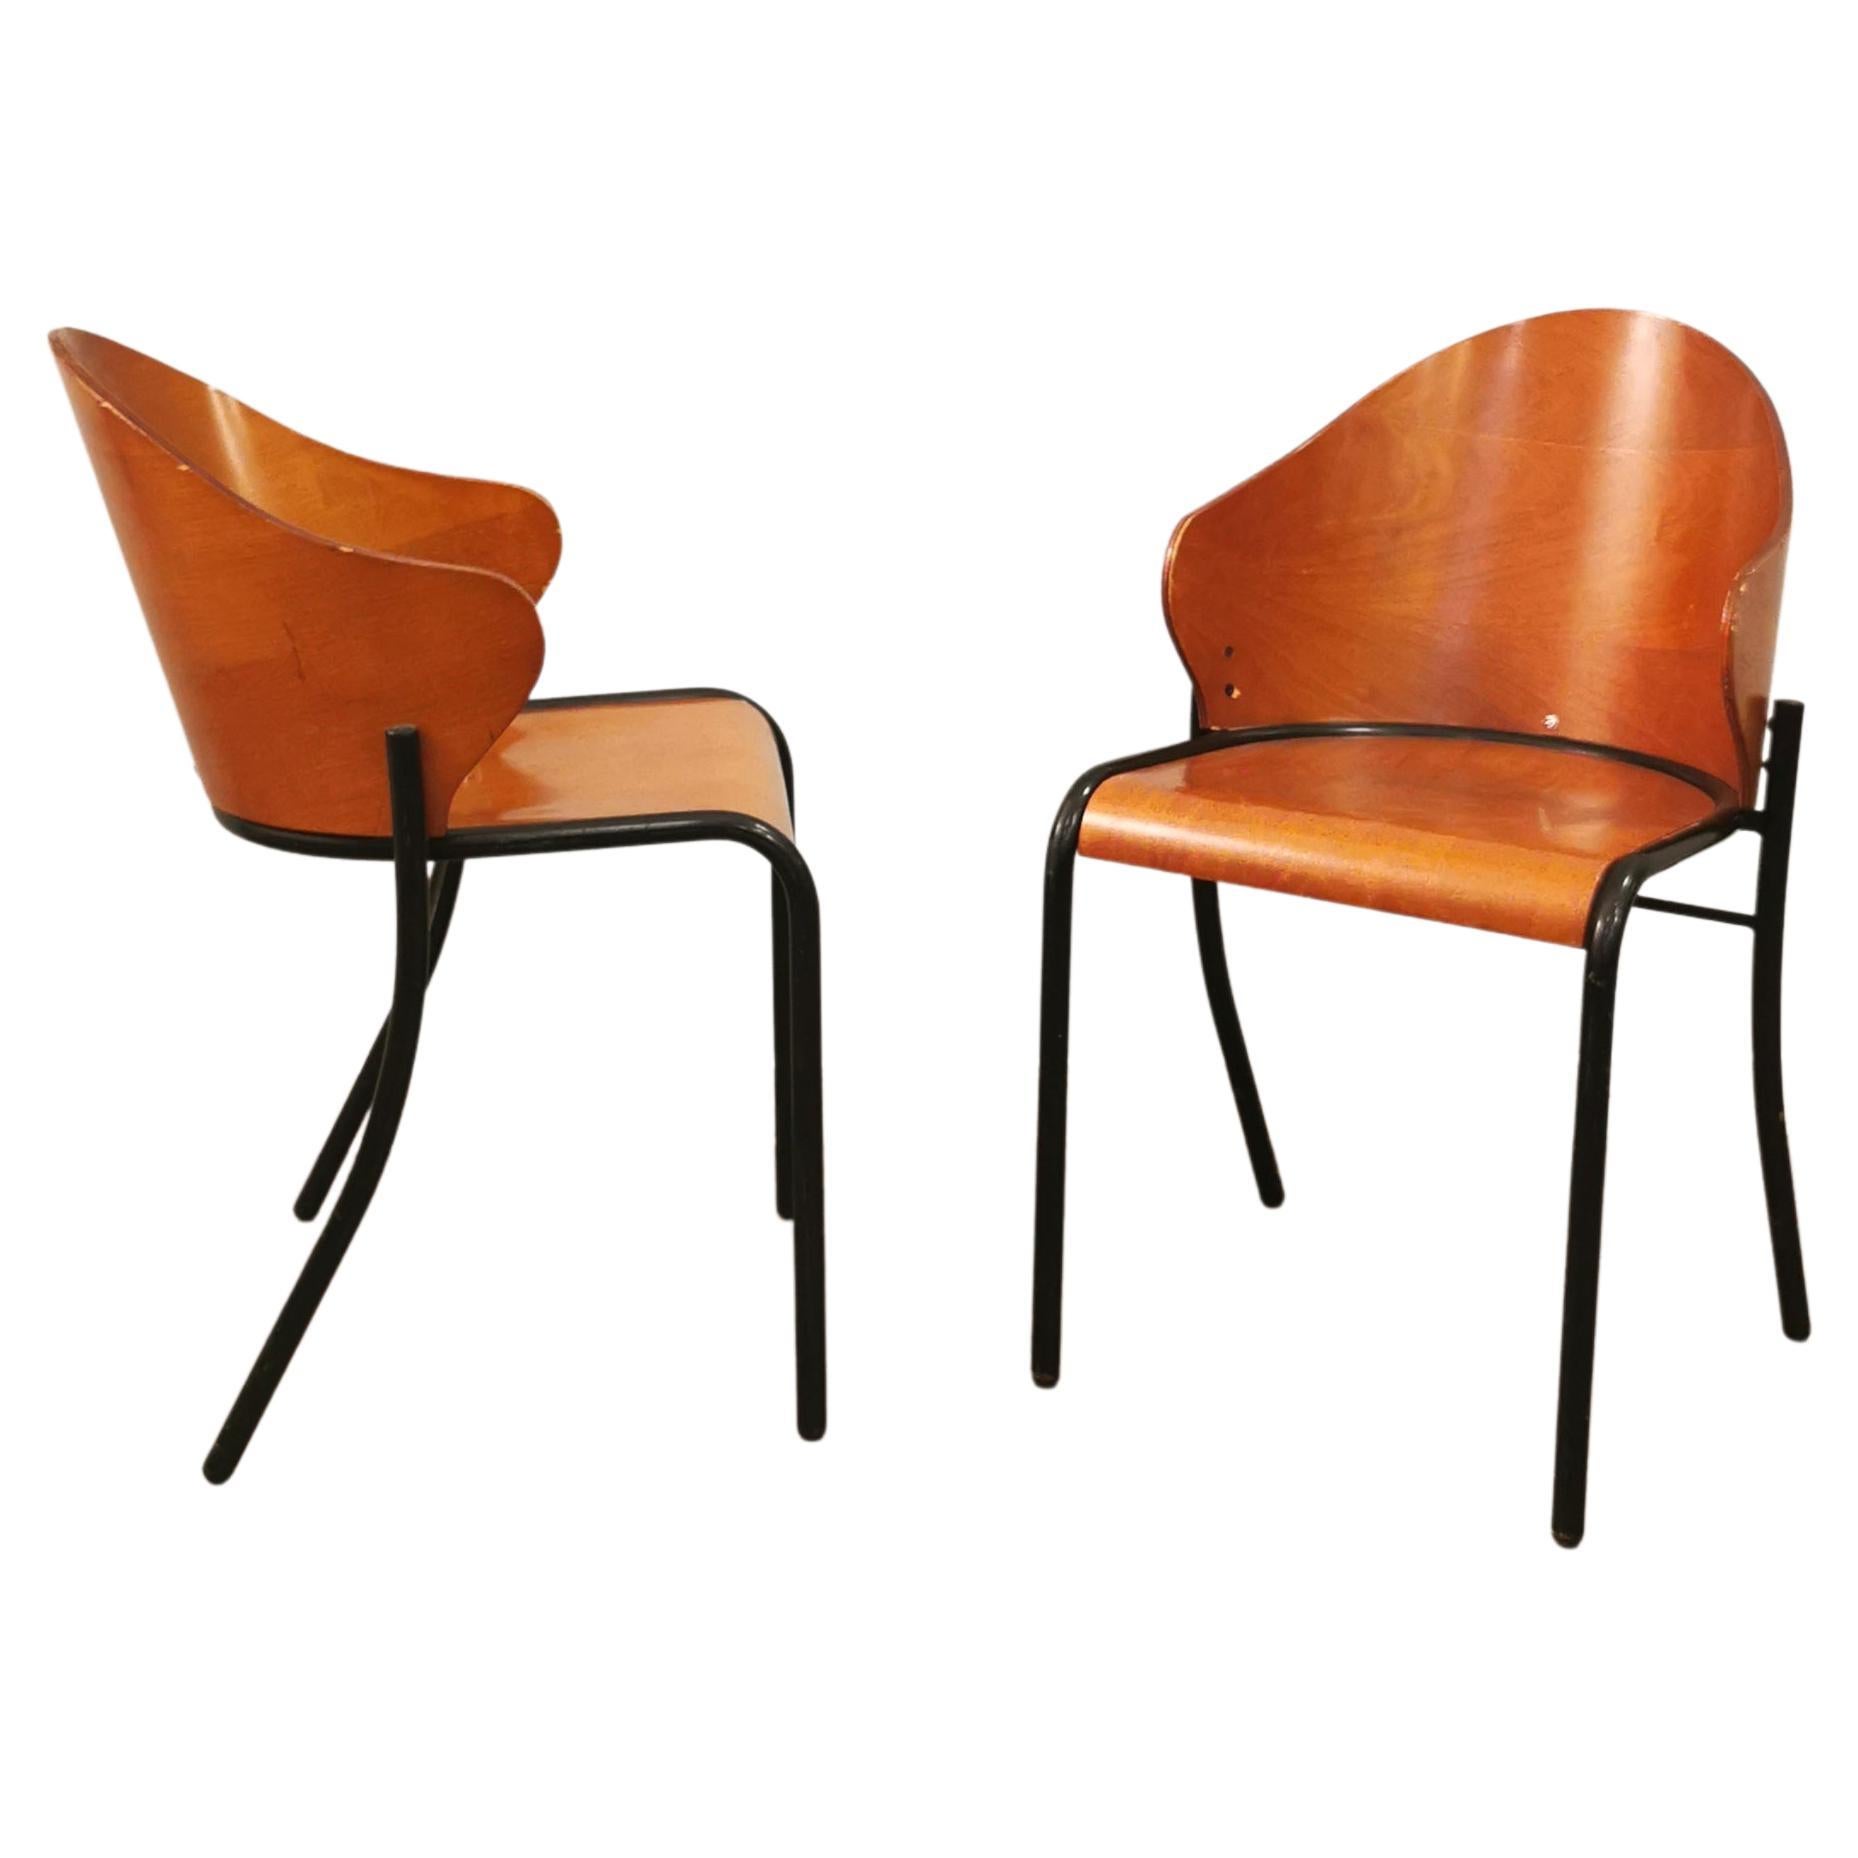 Midcentury Dining Room Chairs Curved Wood Enameled Metal Italy 1960s Set of 2